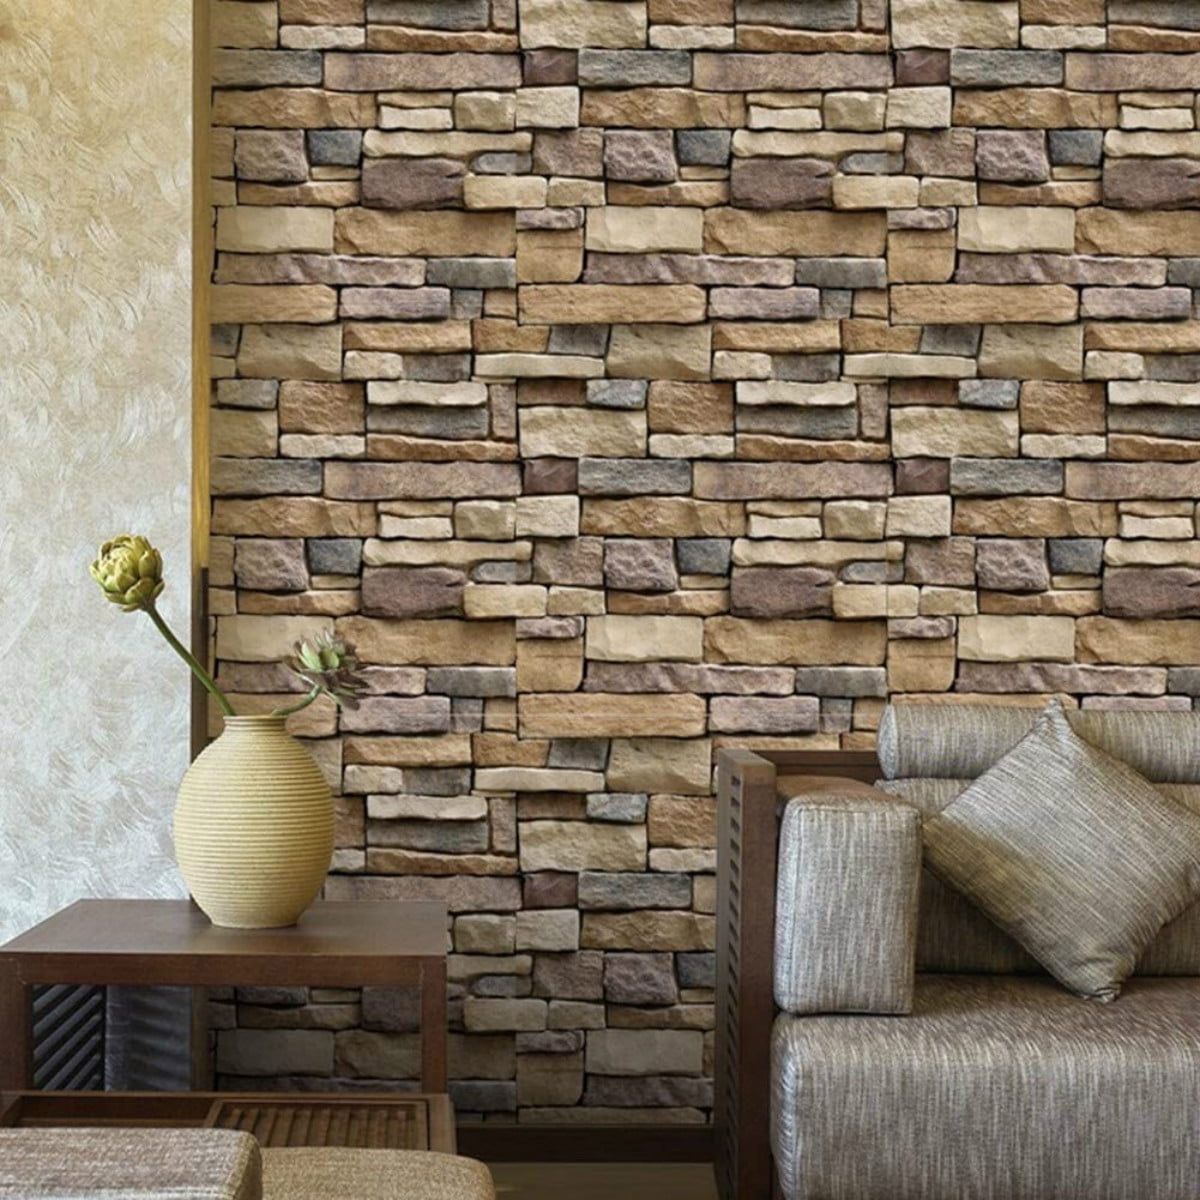 3D Mosaic Stone Tile Peel and Stick Removable Self Adhesive Wall Home Decor 